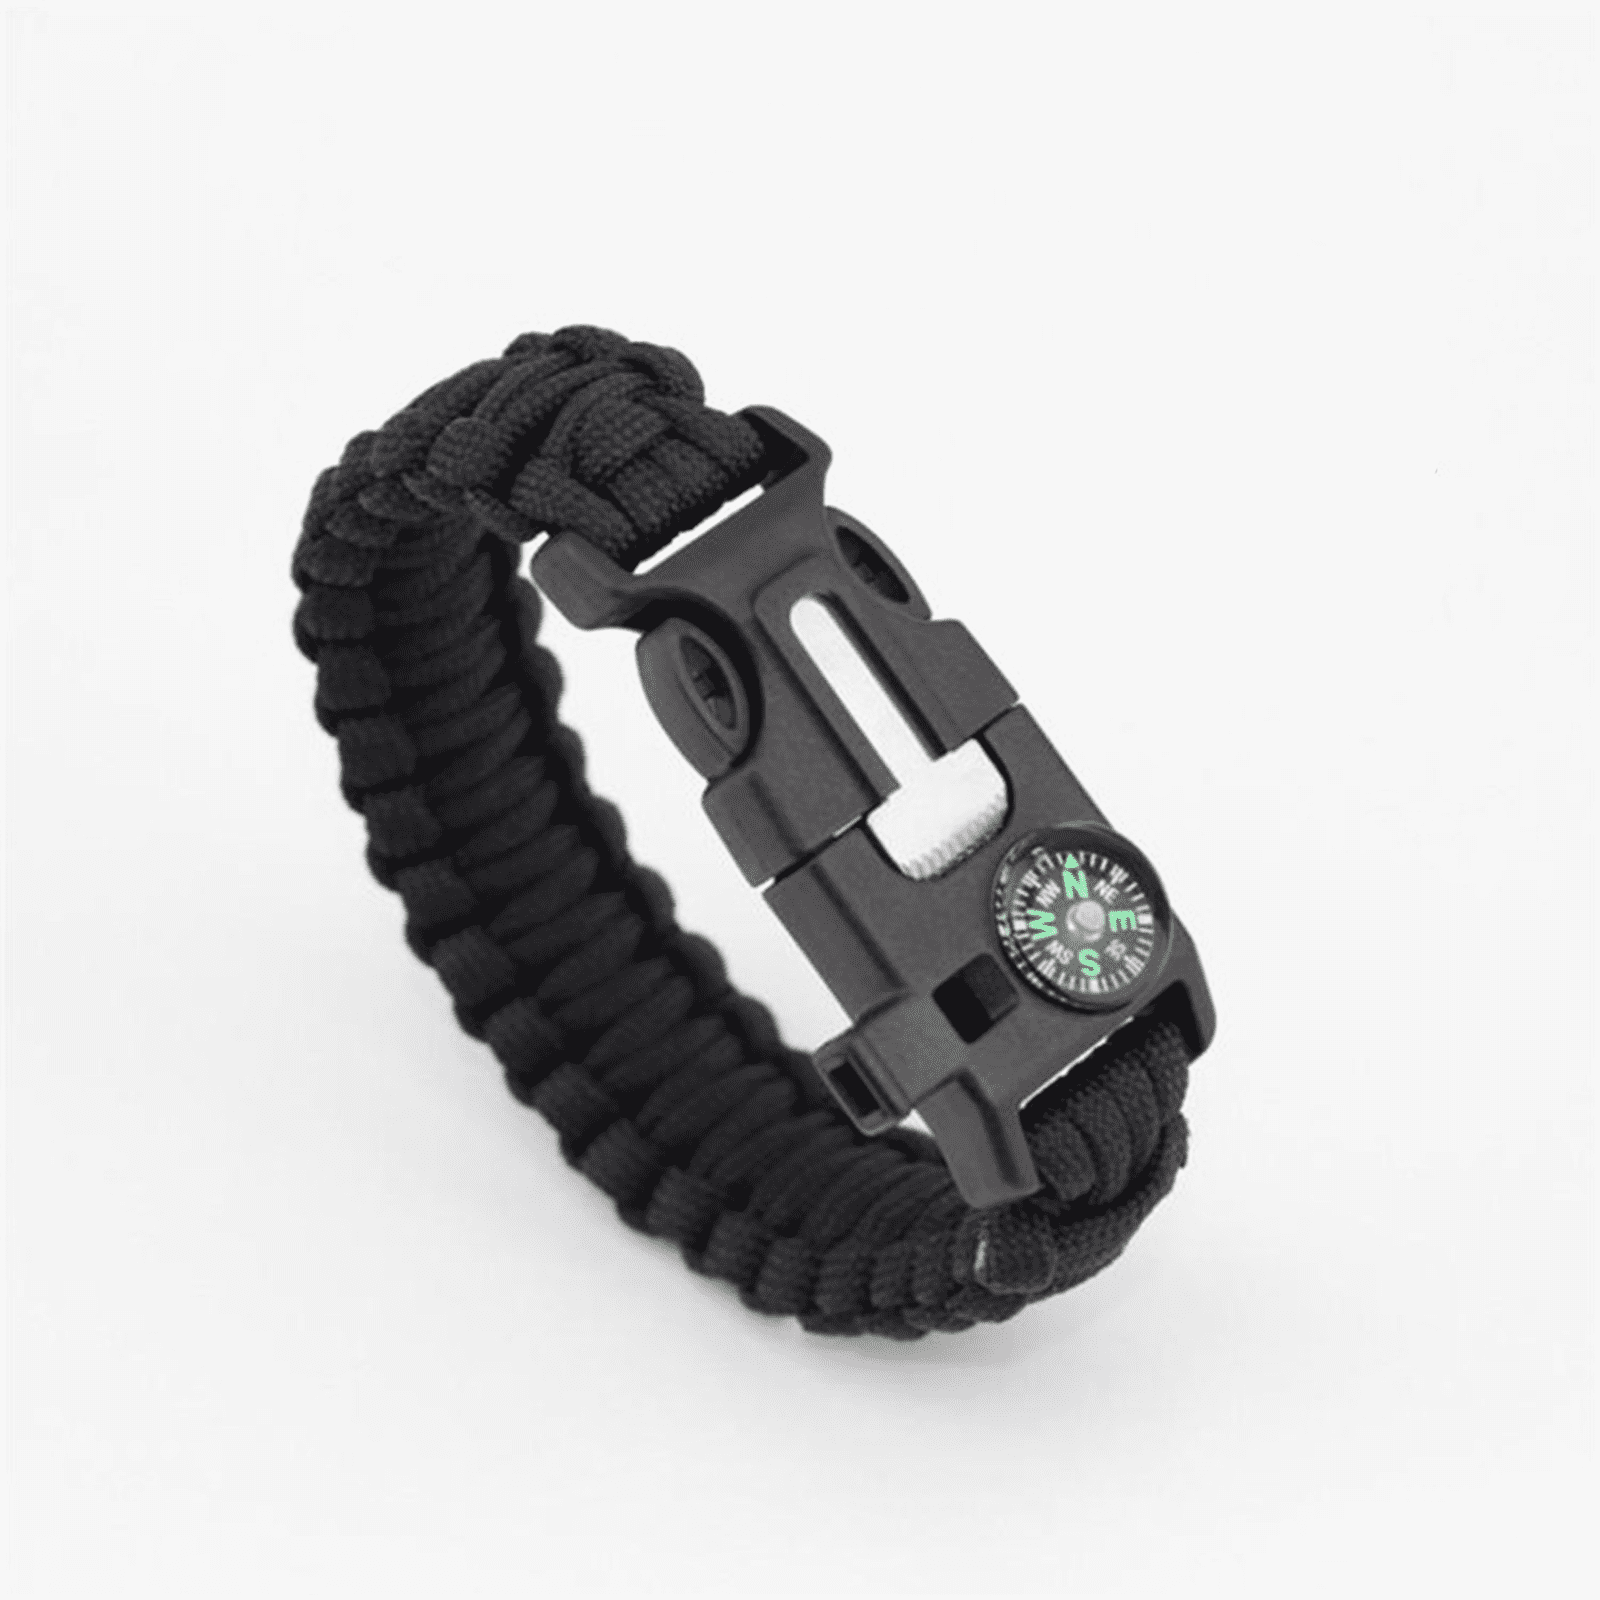 Buckle With Whistle Compass Flint Fire Starter Scaper For Paracord Bracelet HICA